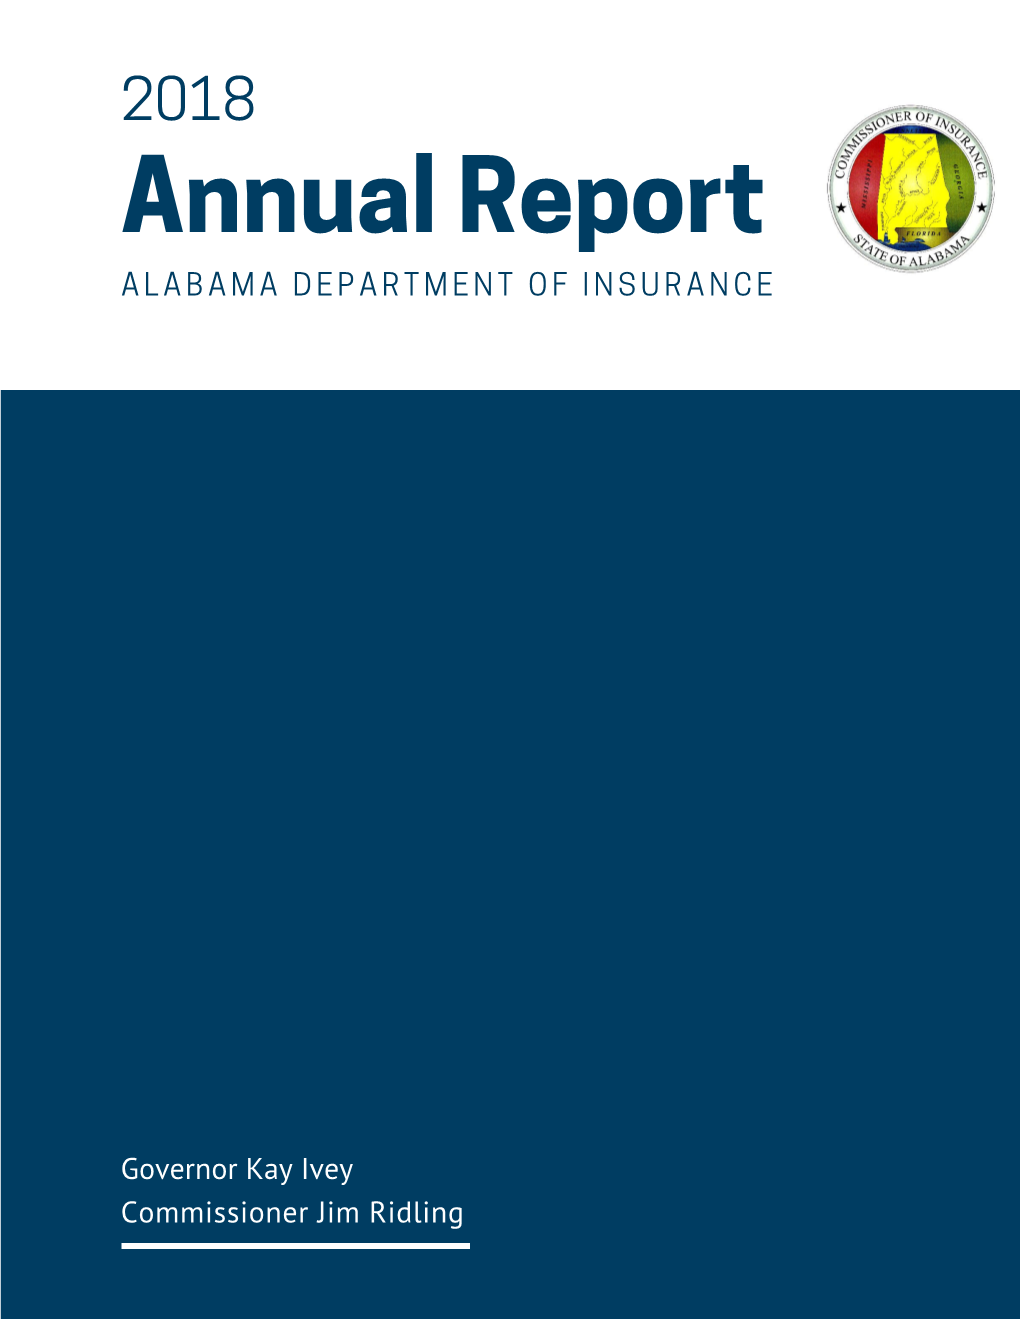 2018 Annual Report of the Alabama